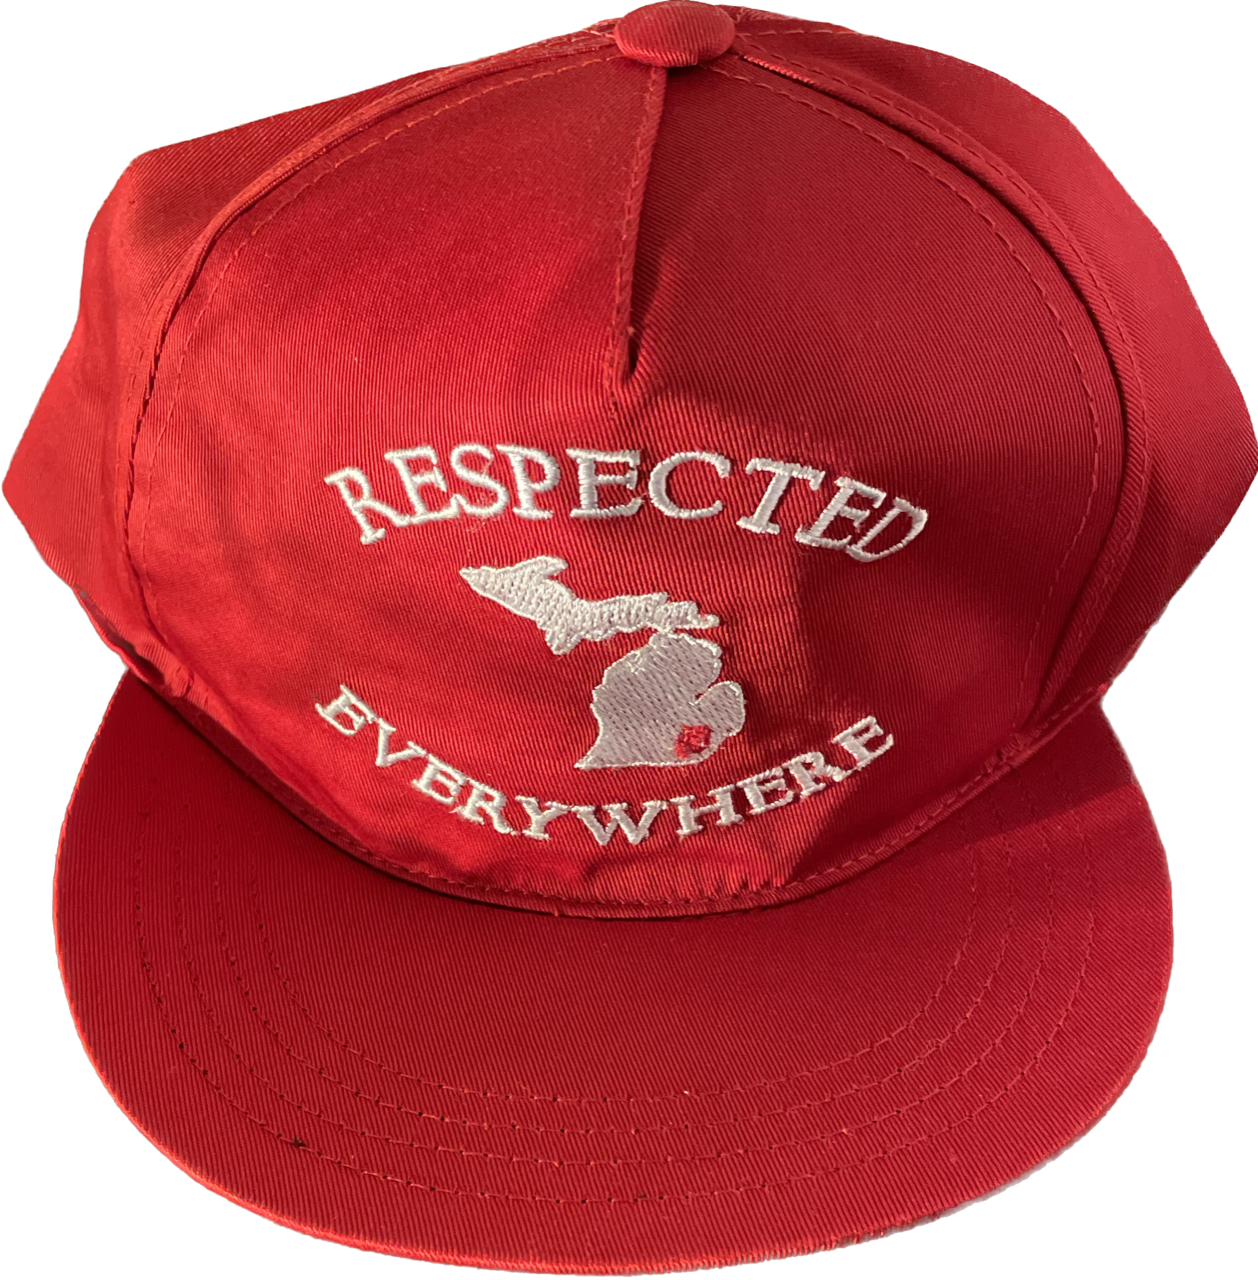 Red Mitten Snapback with White Letters